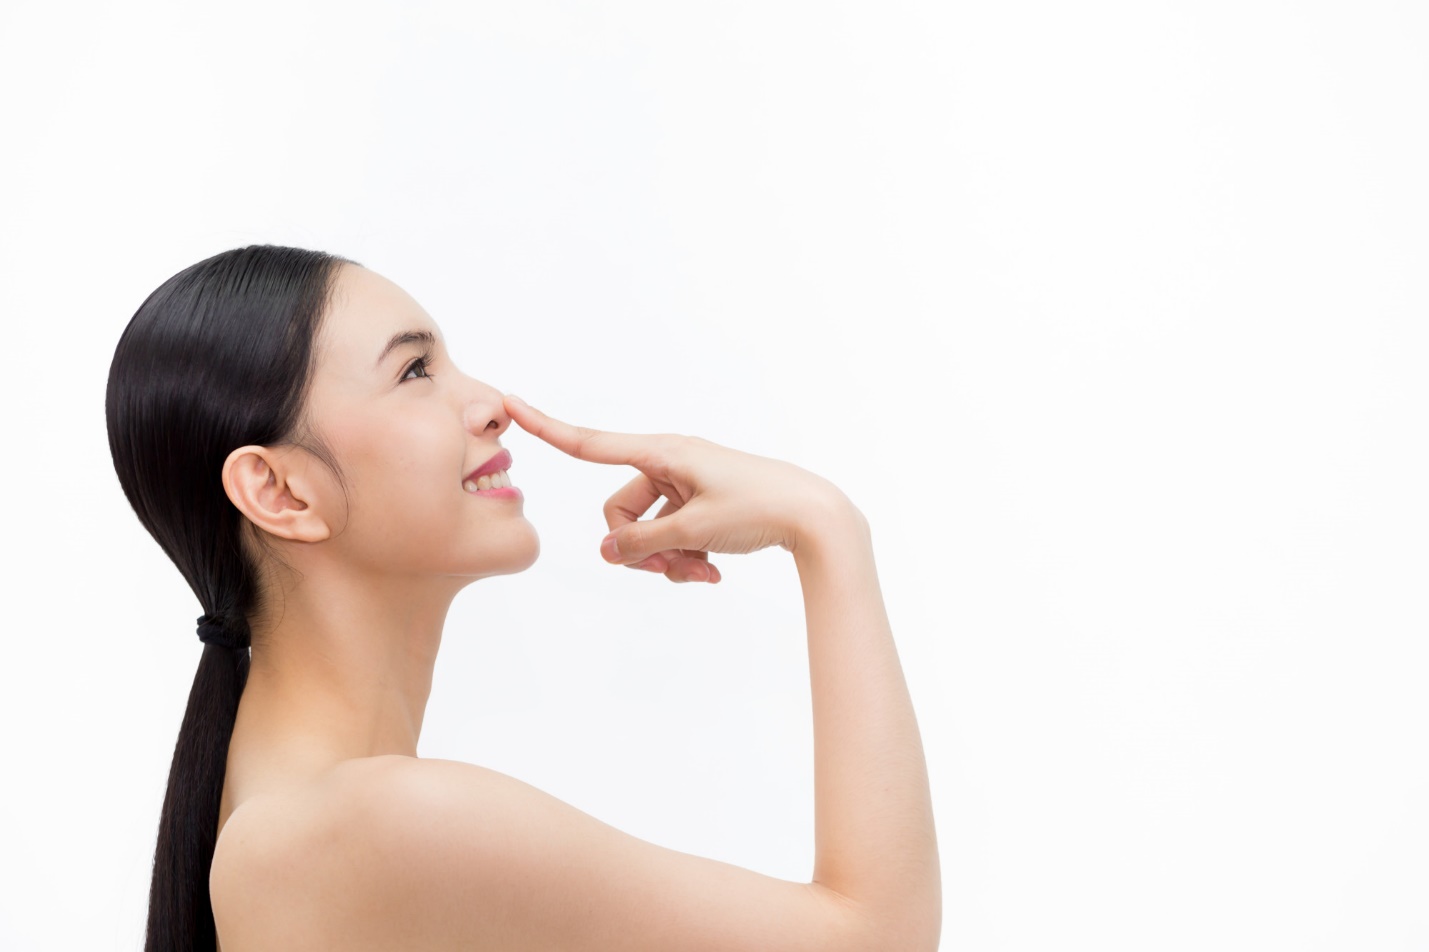 4 Signs You Need a Nose Job